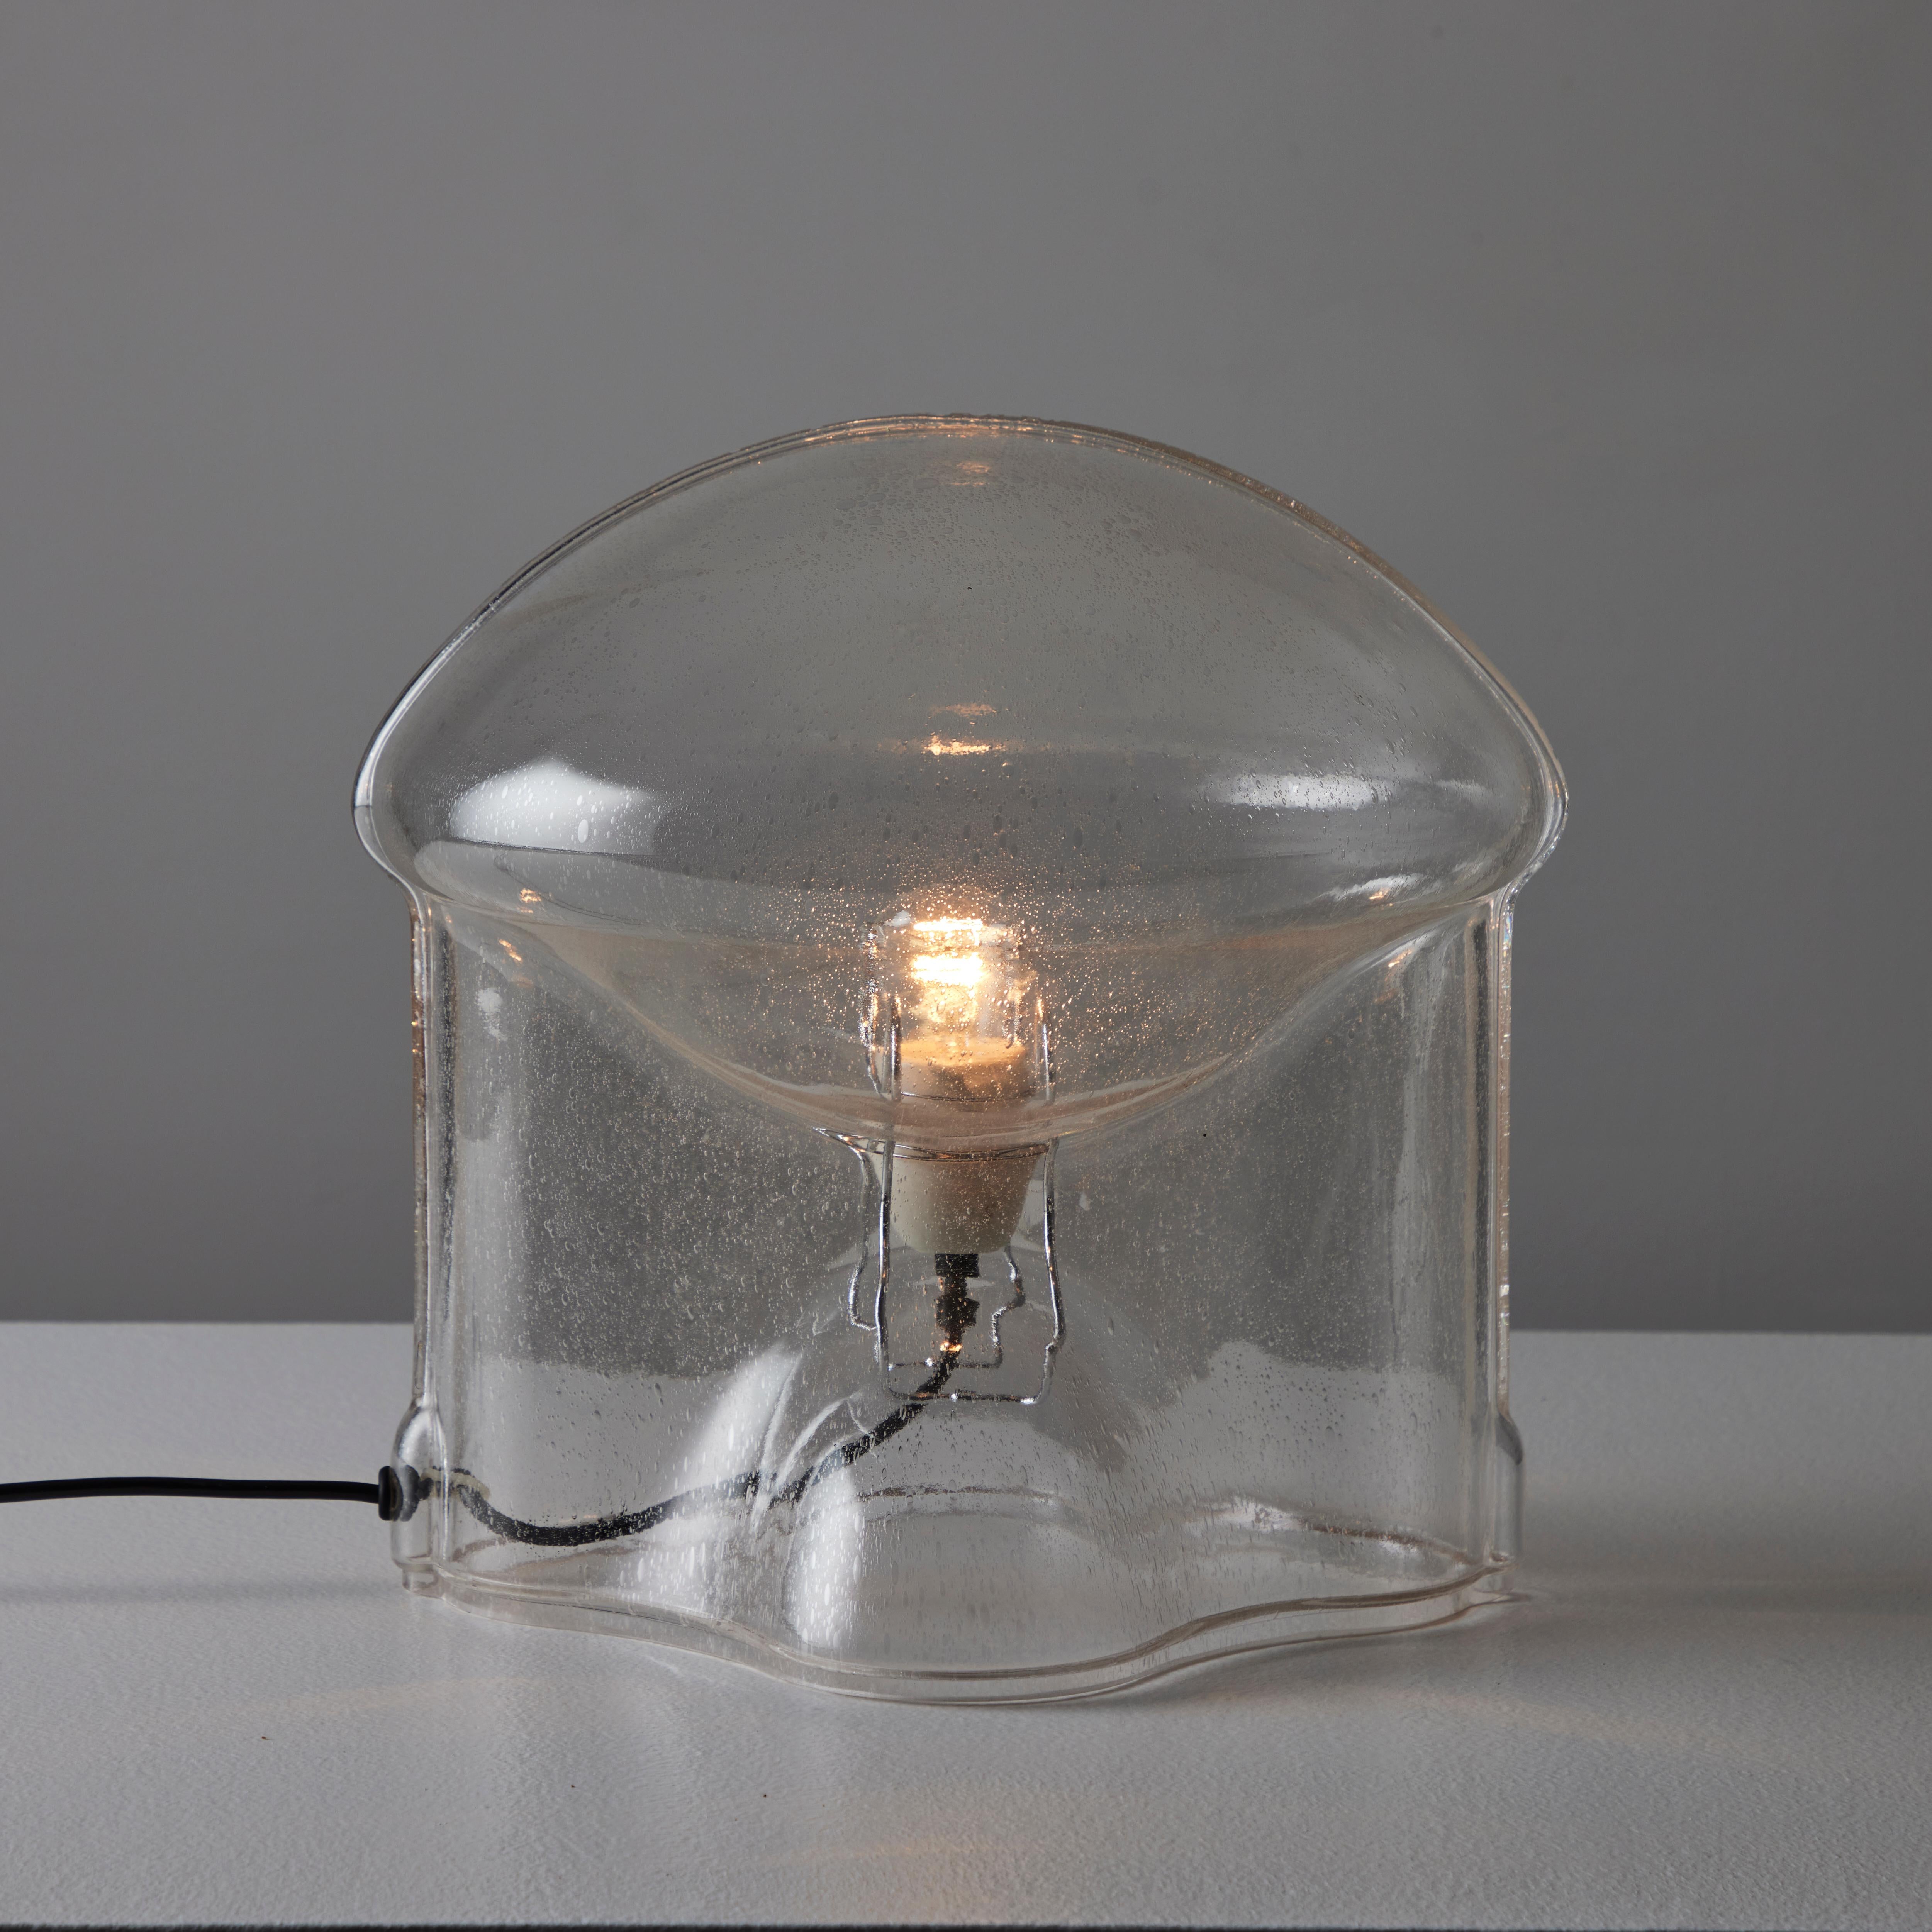 'Medusa' Table Lamp by Umberto Riva for VeArt. Designed and manufactured in Italy, in 1972. An anatomical molded clear glass table lamp. The clear glass is one piece and works alongside a spring operated socket holder. The lamping consists of a